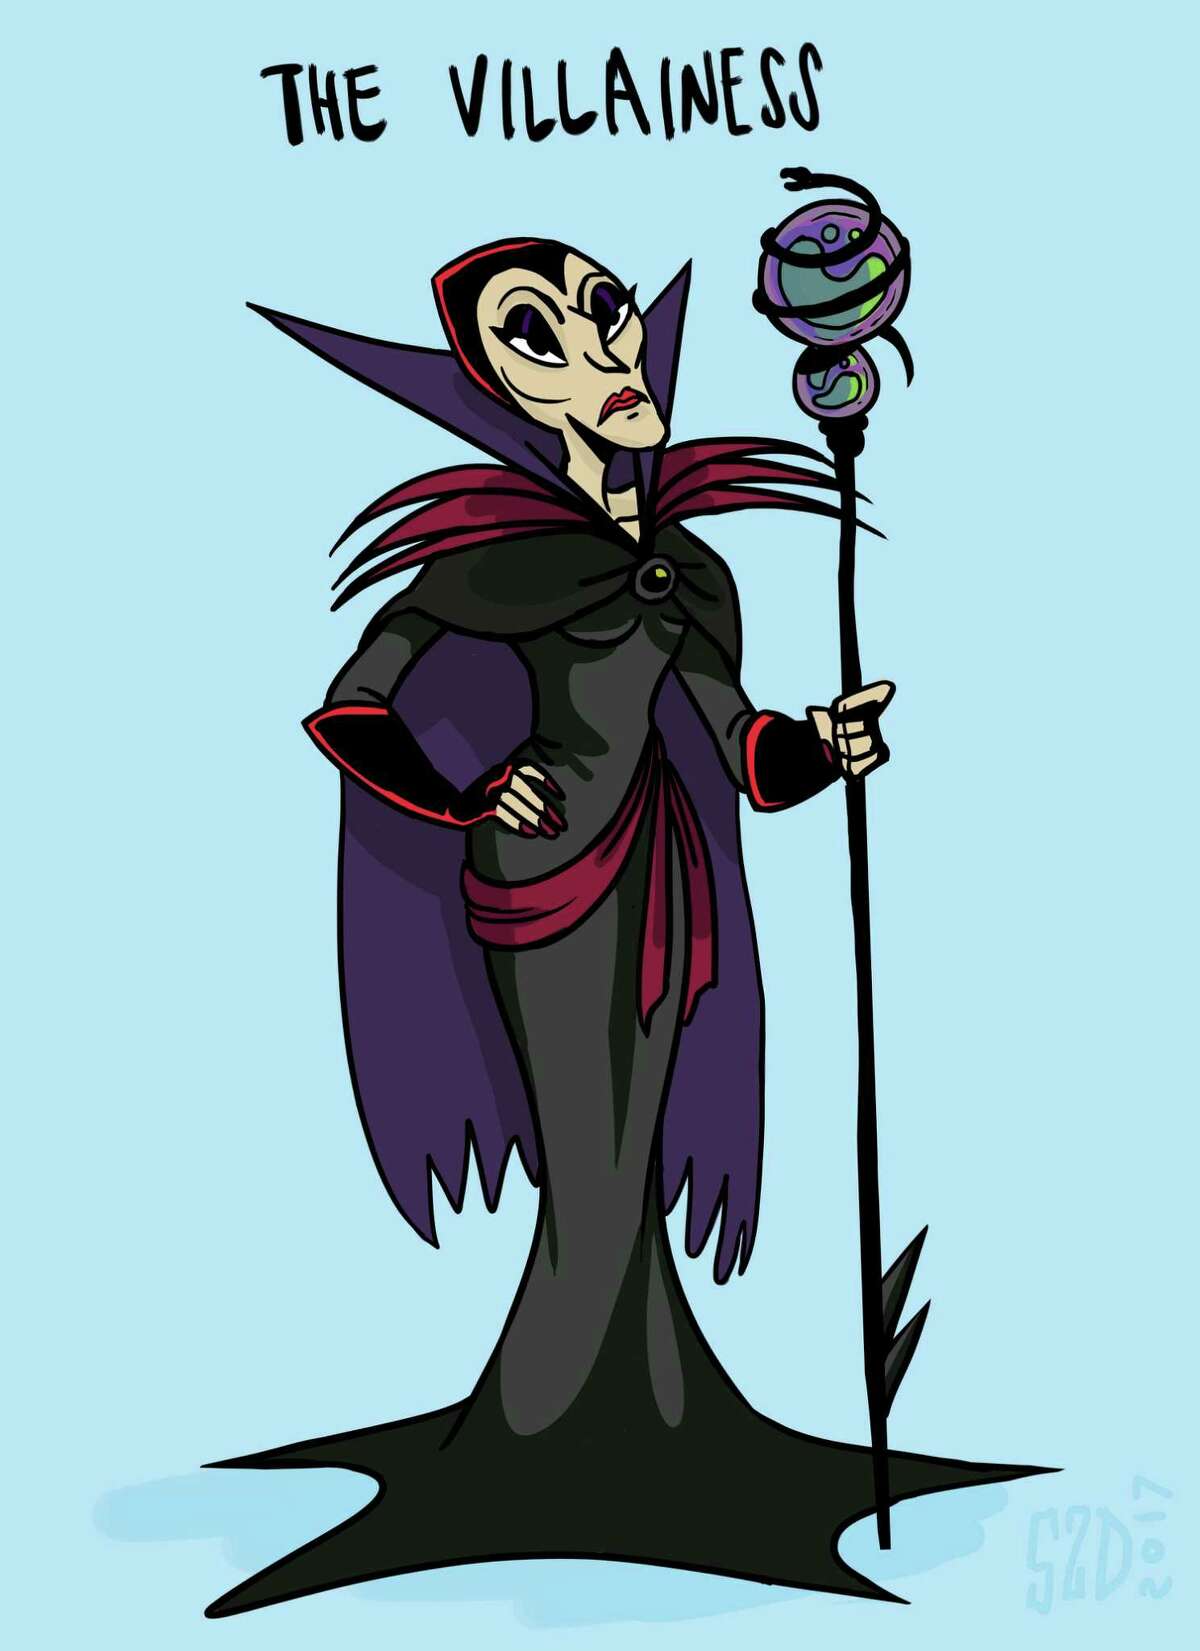 This sketch by Stephanie Delazeri, an animation student at California Institute of the Arts in Santa Clarita, Calif., shows "The Villainess," an archetypal female character. More women are entering the field of animation, and one of their goals is to create more realistic female characters. Cal Arts instructor Erica Larsen-Dockray, who teaches a class on "The Animated Woman," said of The Villainess: While male villains can be any shape or size, female villains almost always are old and unmarried. They have gray hair, wrinkles and harsh makeup. They're hardened and sour and always look stern and angry. Visually, they're typically depicted looking almost bony with sharp lines, including high cheekbones and pointy elbows. (Stephanie Delazeri/California Institute of the Arts via AP)